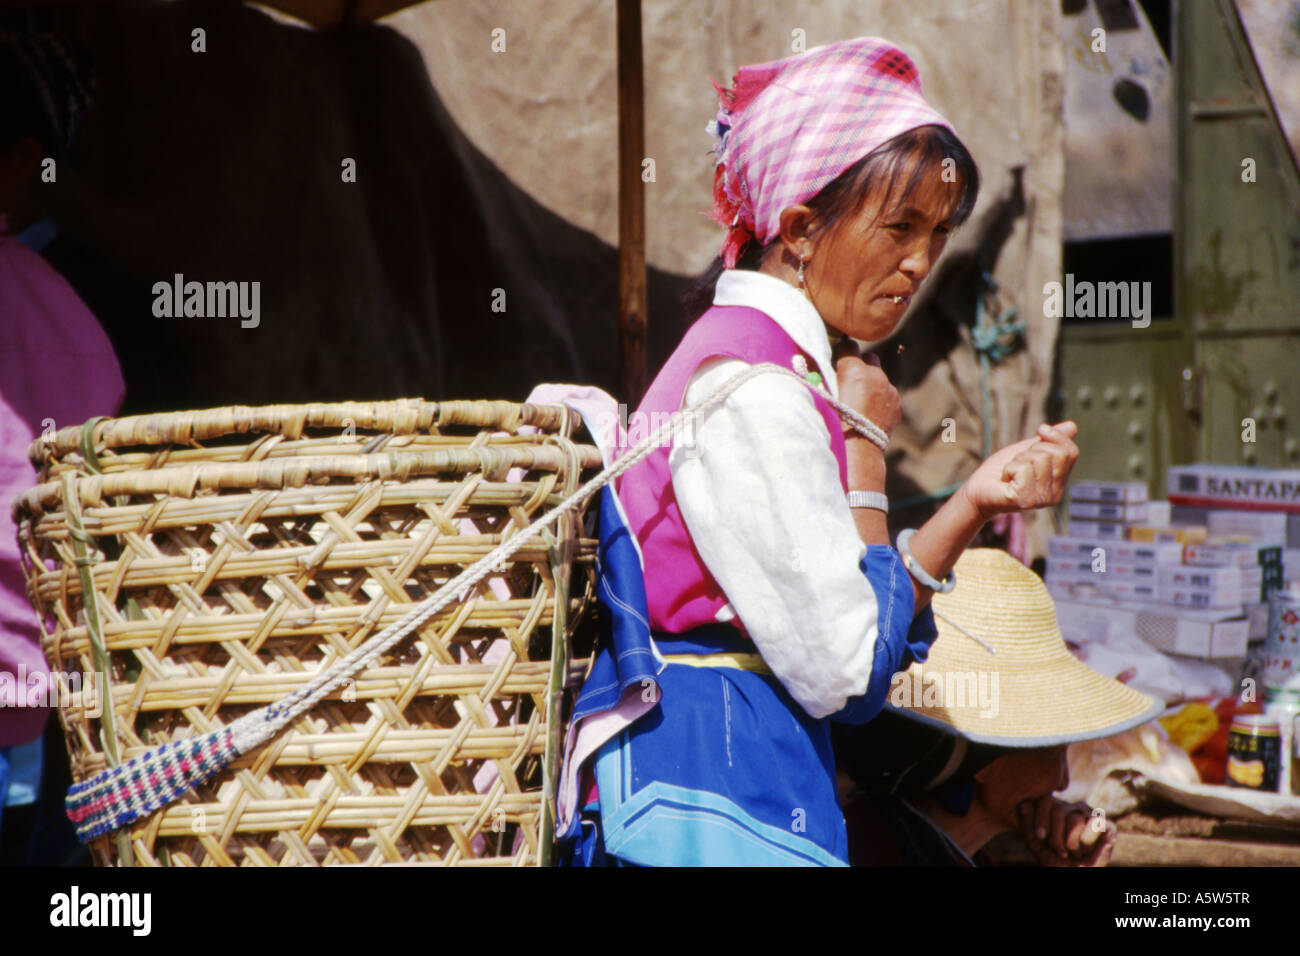 Naxi woman in traditional dress,large wicker basket on her back,Wase market near Dali,Yunnan province,China. Stock Photo